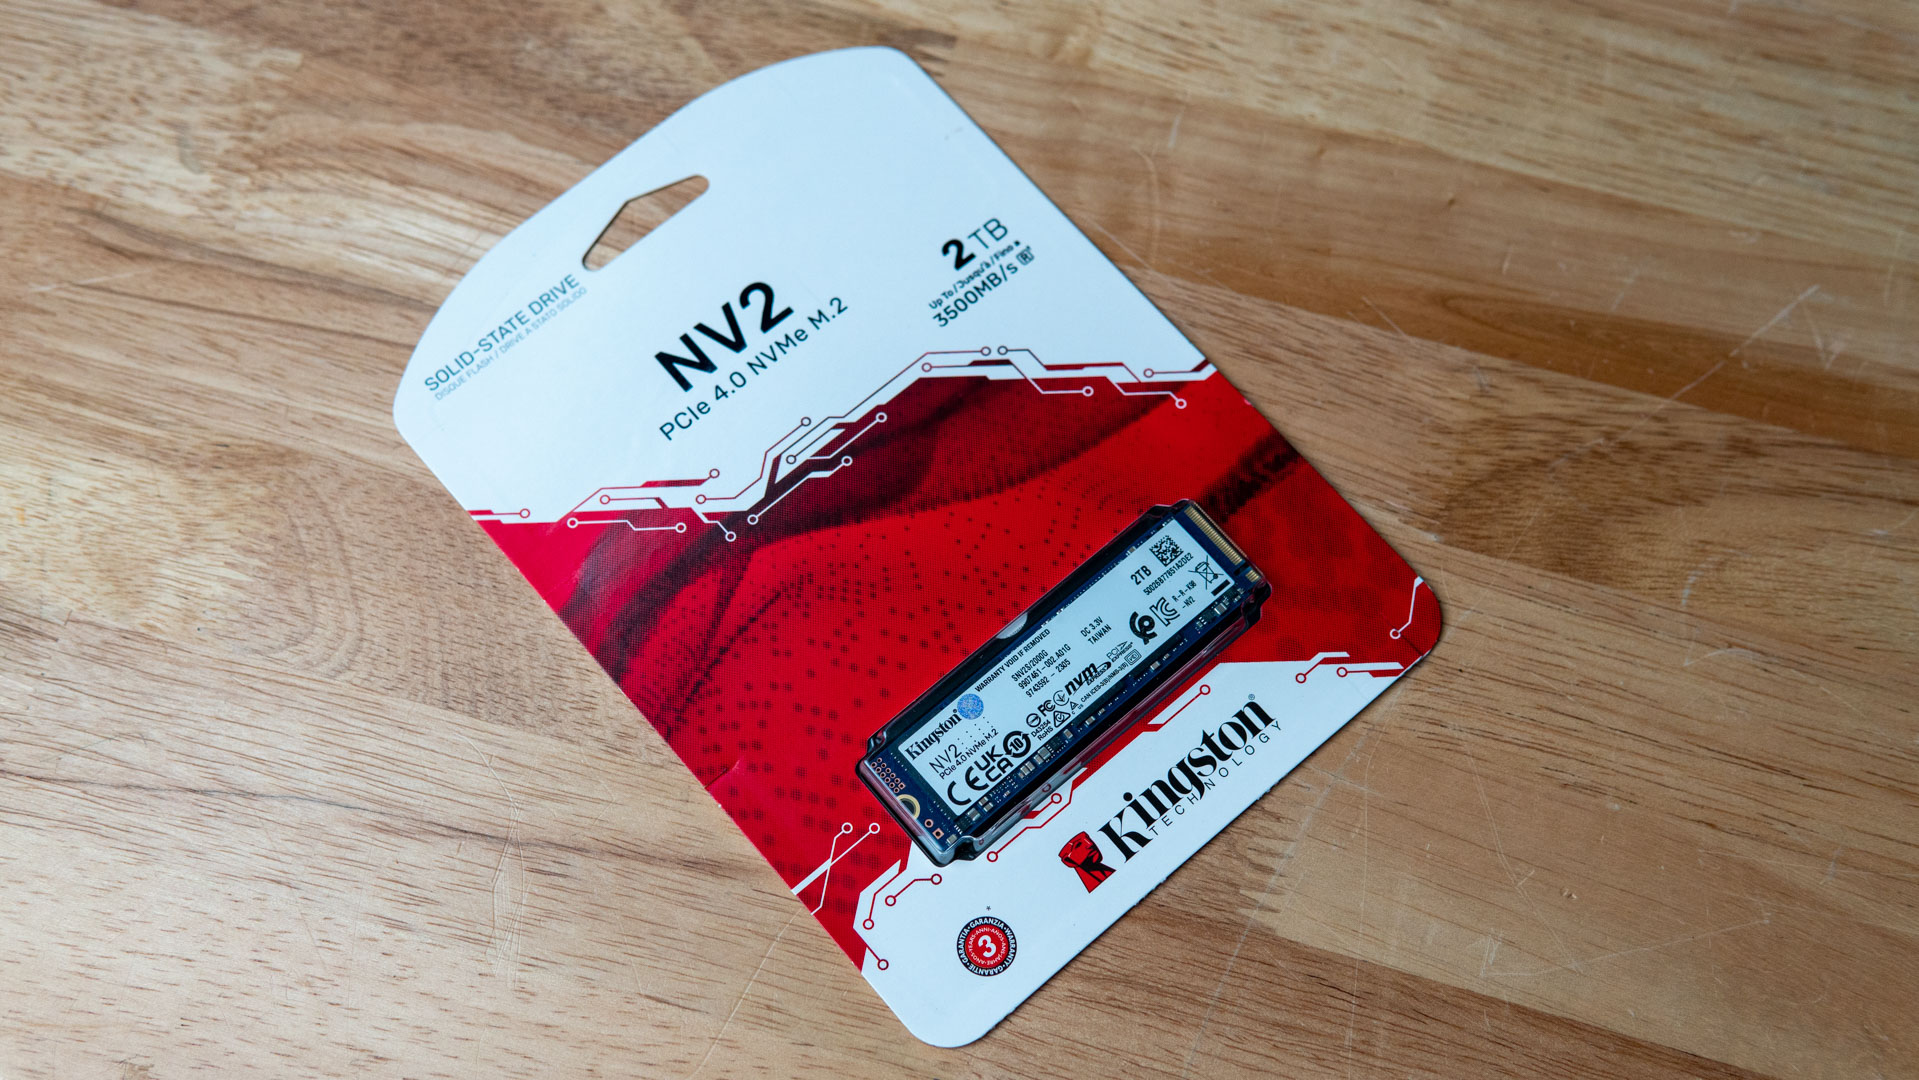 Kingston NV2 PCIe 4.0 NVMe SSD Review : A budget Gen 4 NVME for